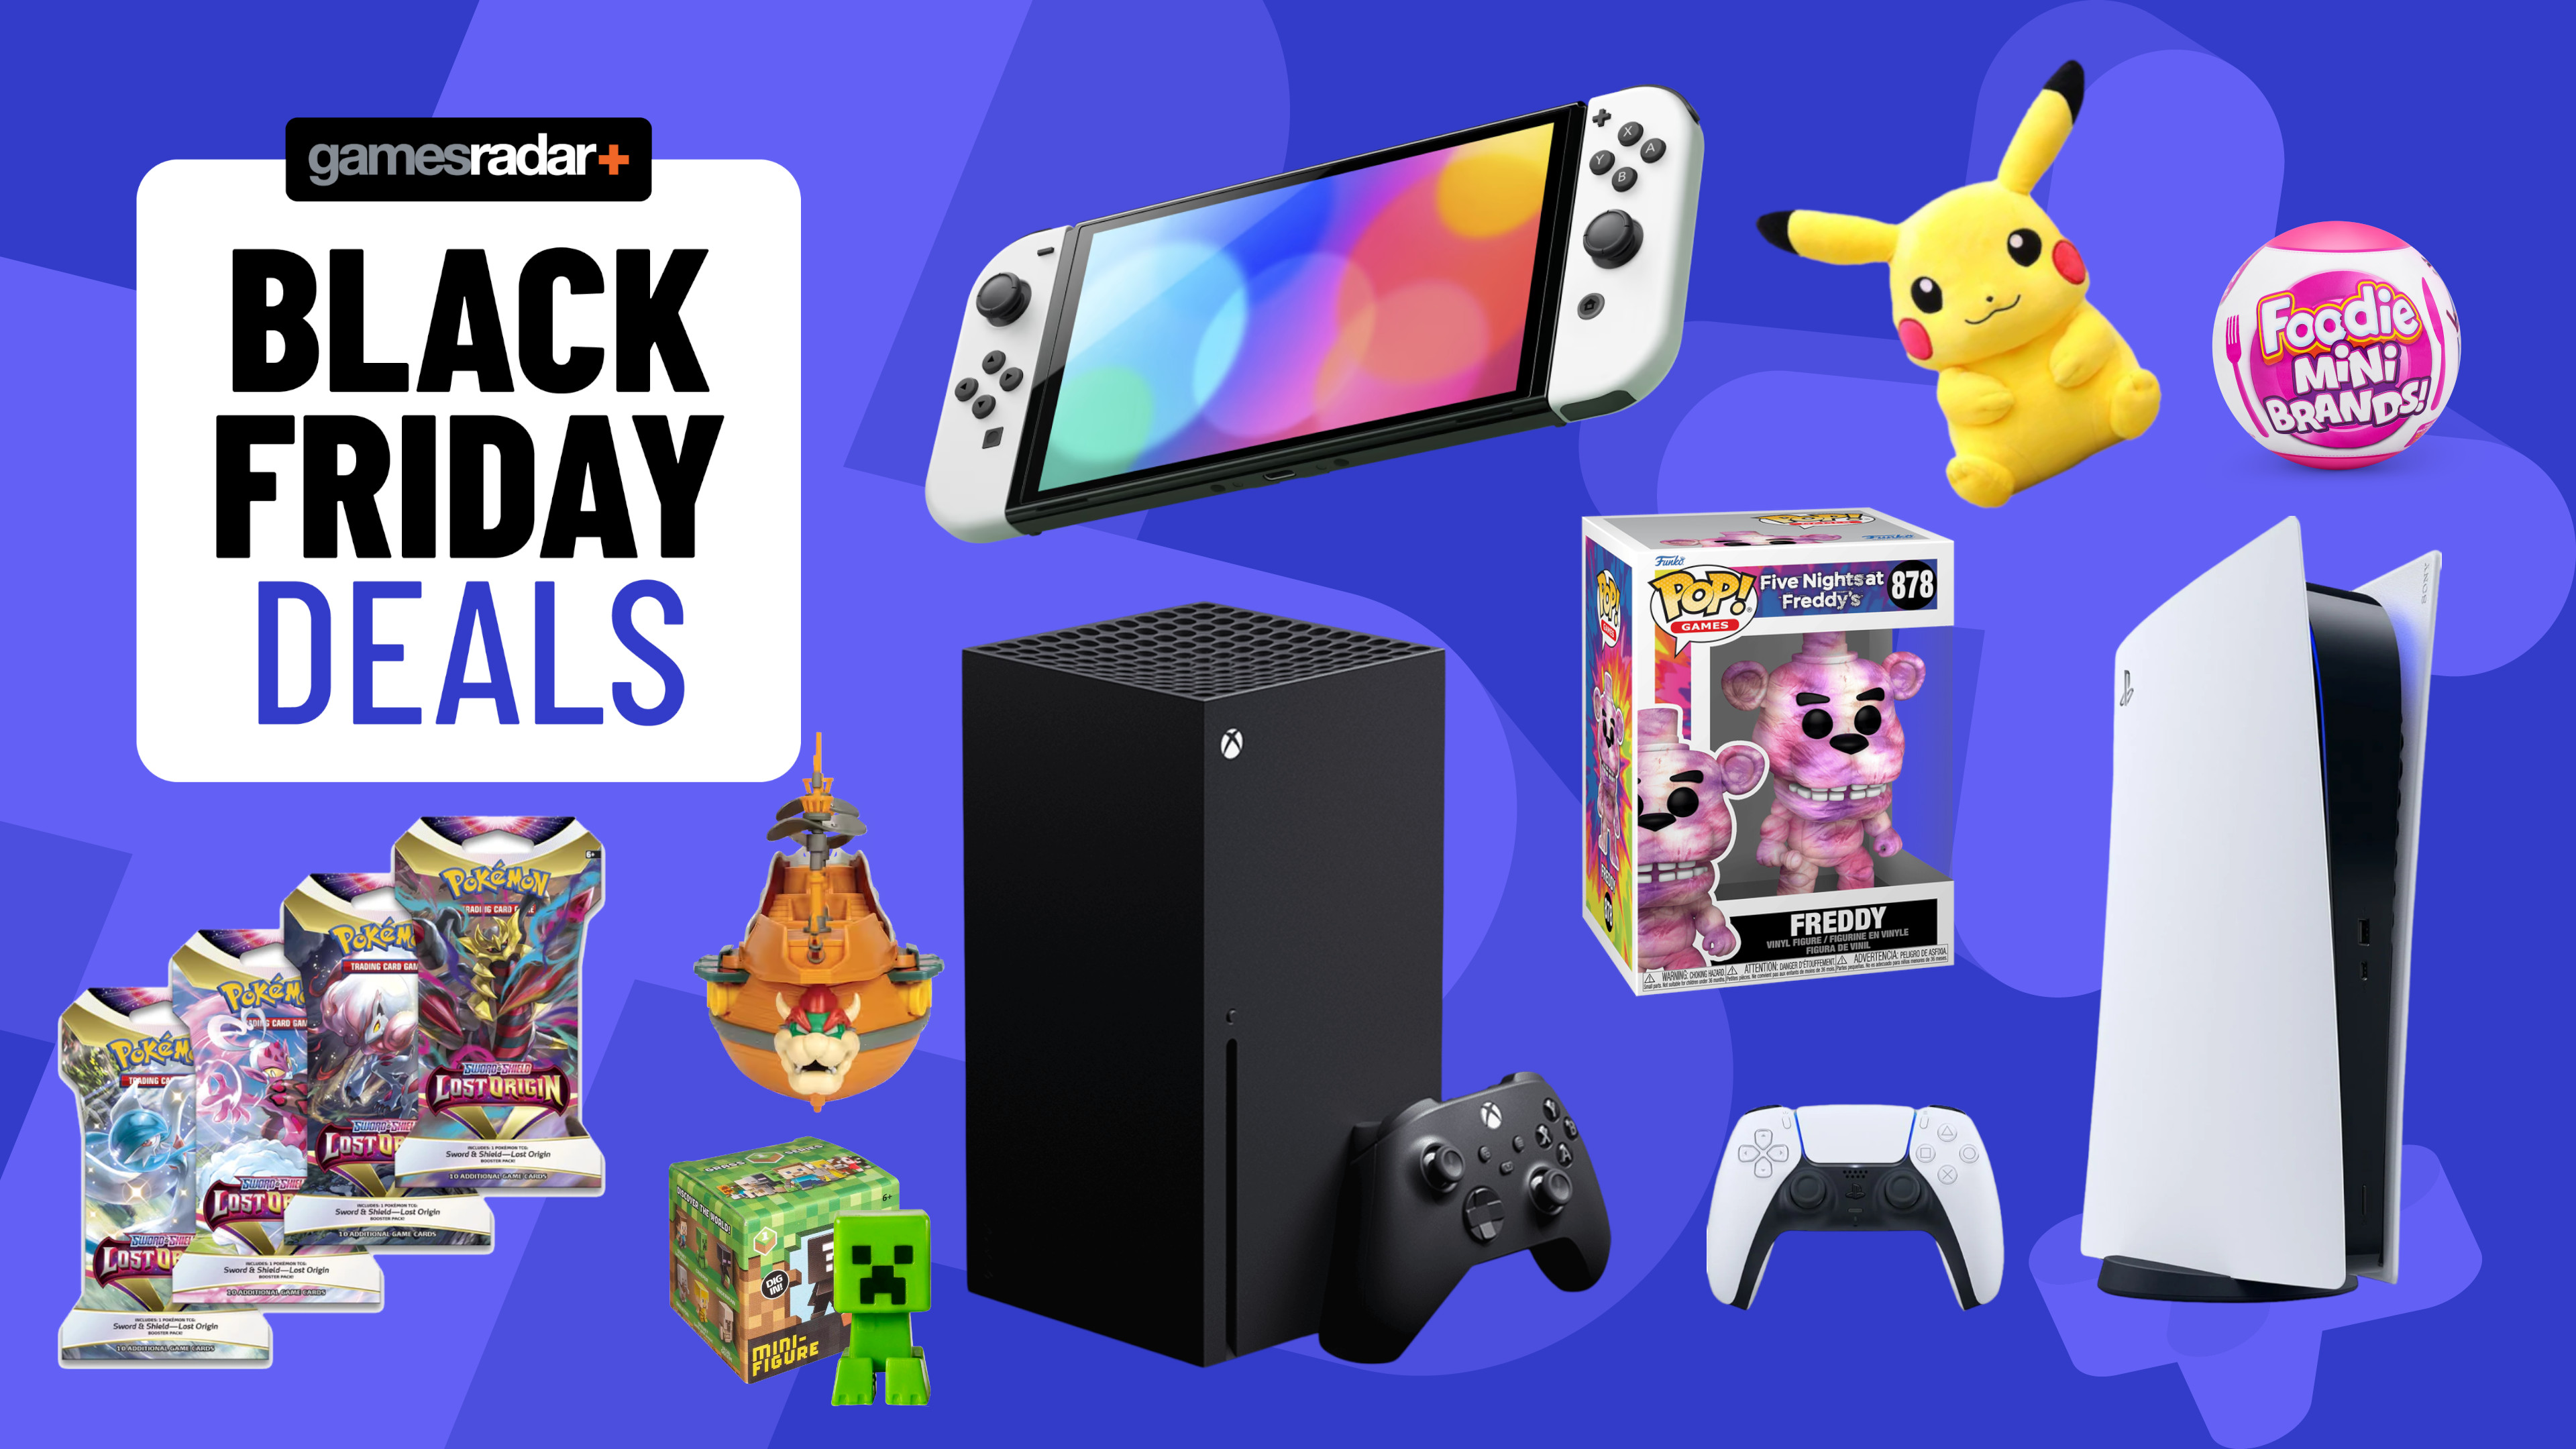 Official Nintendo Switch Black Friday game deals go live today at